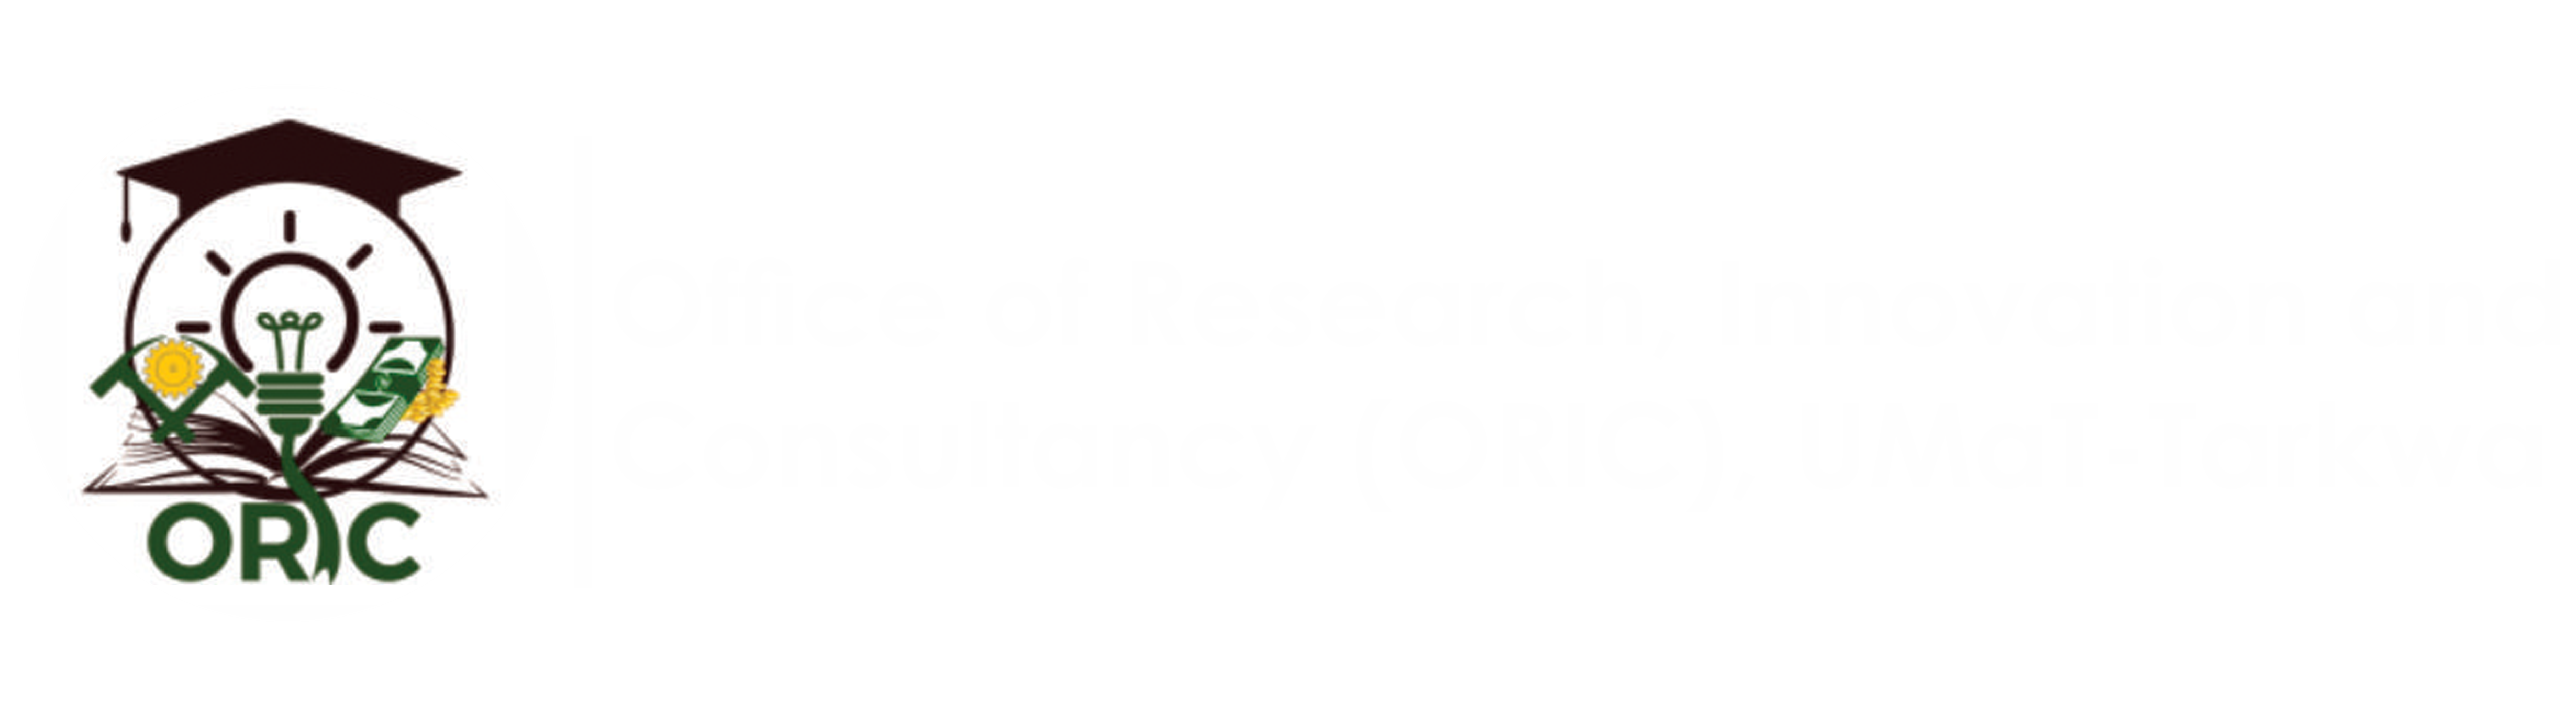 Office of Research, Innovation and Consultancy